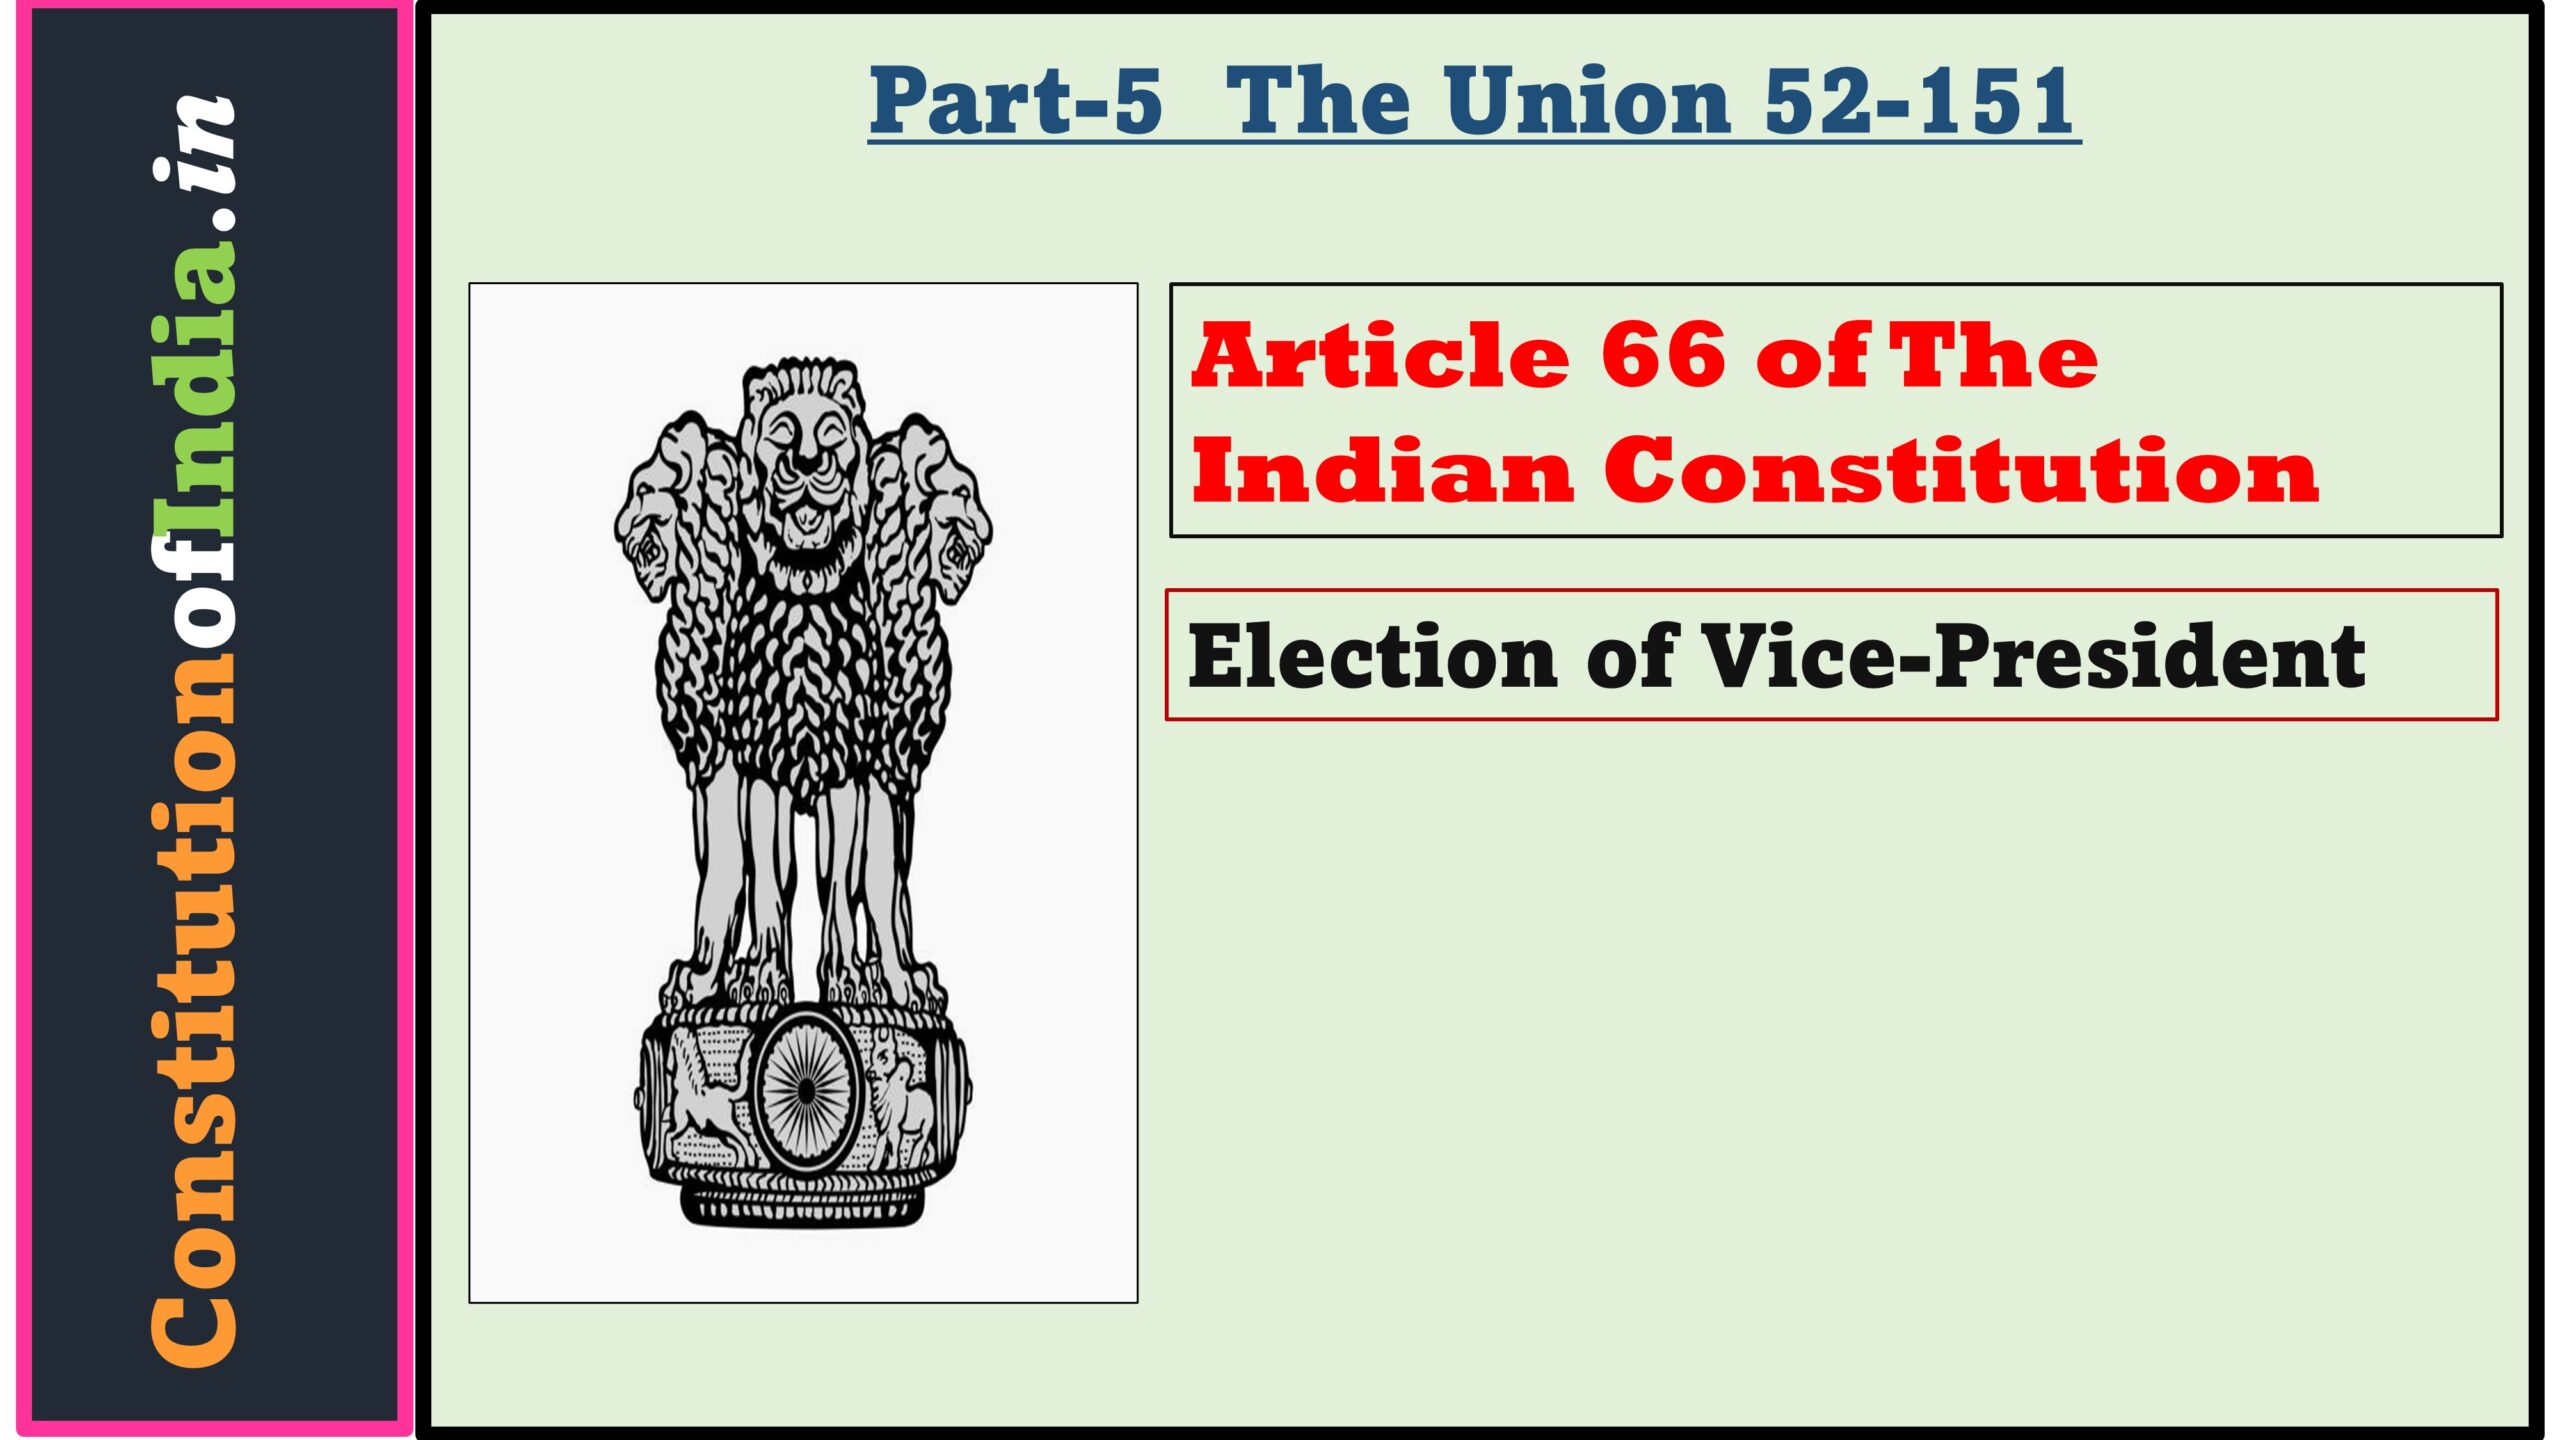 Article 66 of Indian Constitution